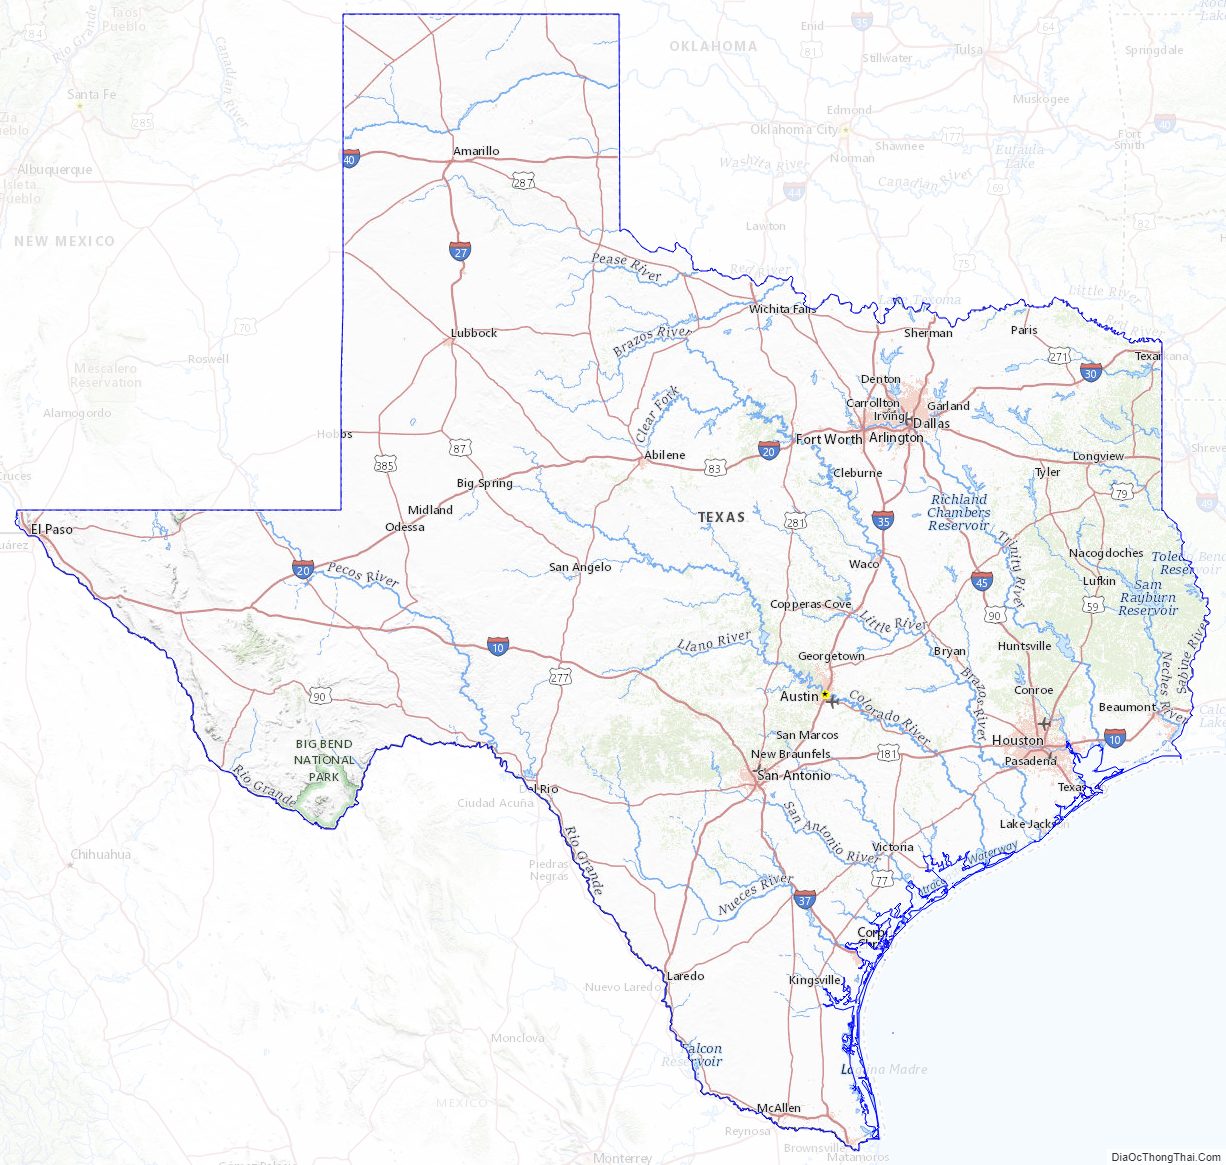 Topographic map of Texas v2